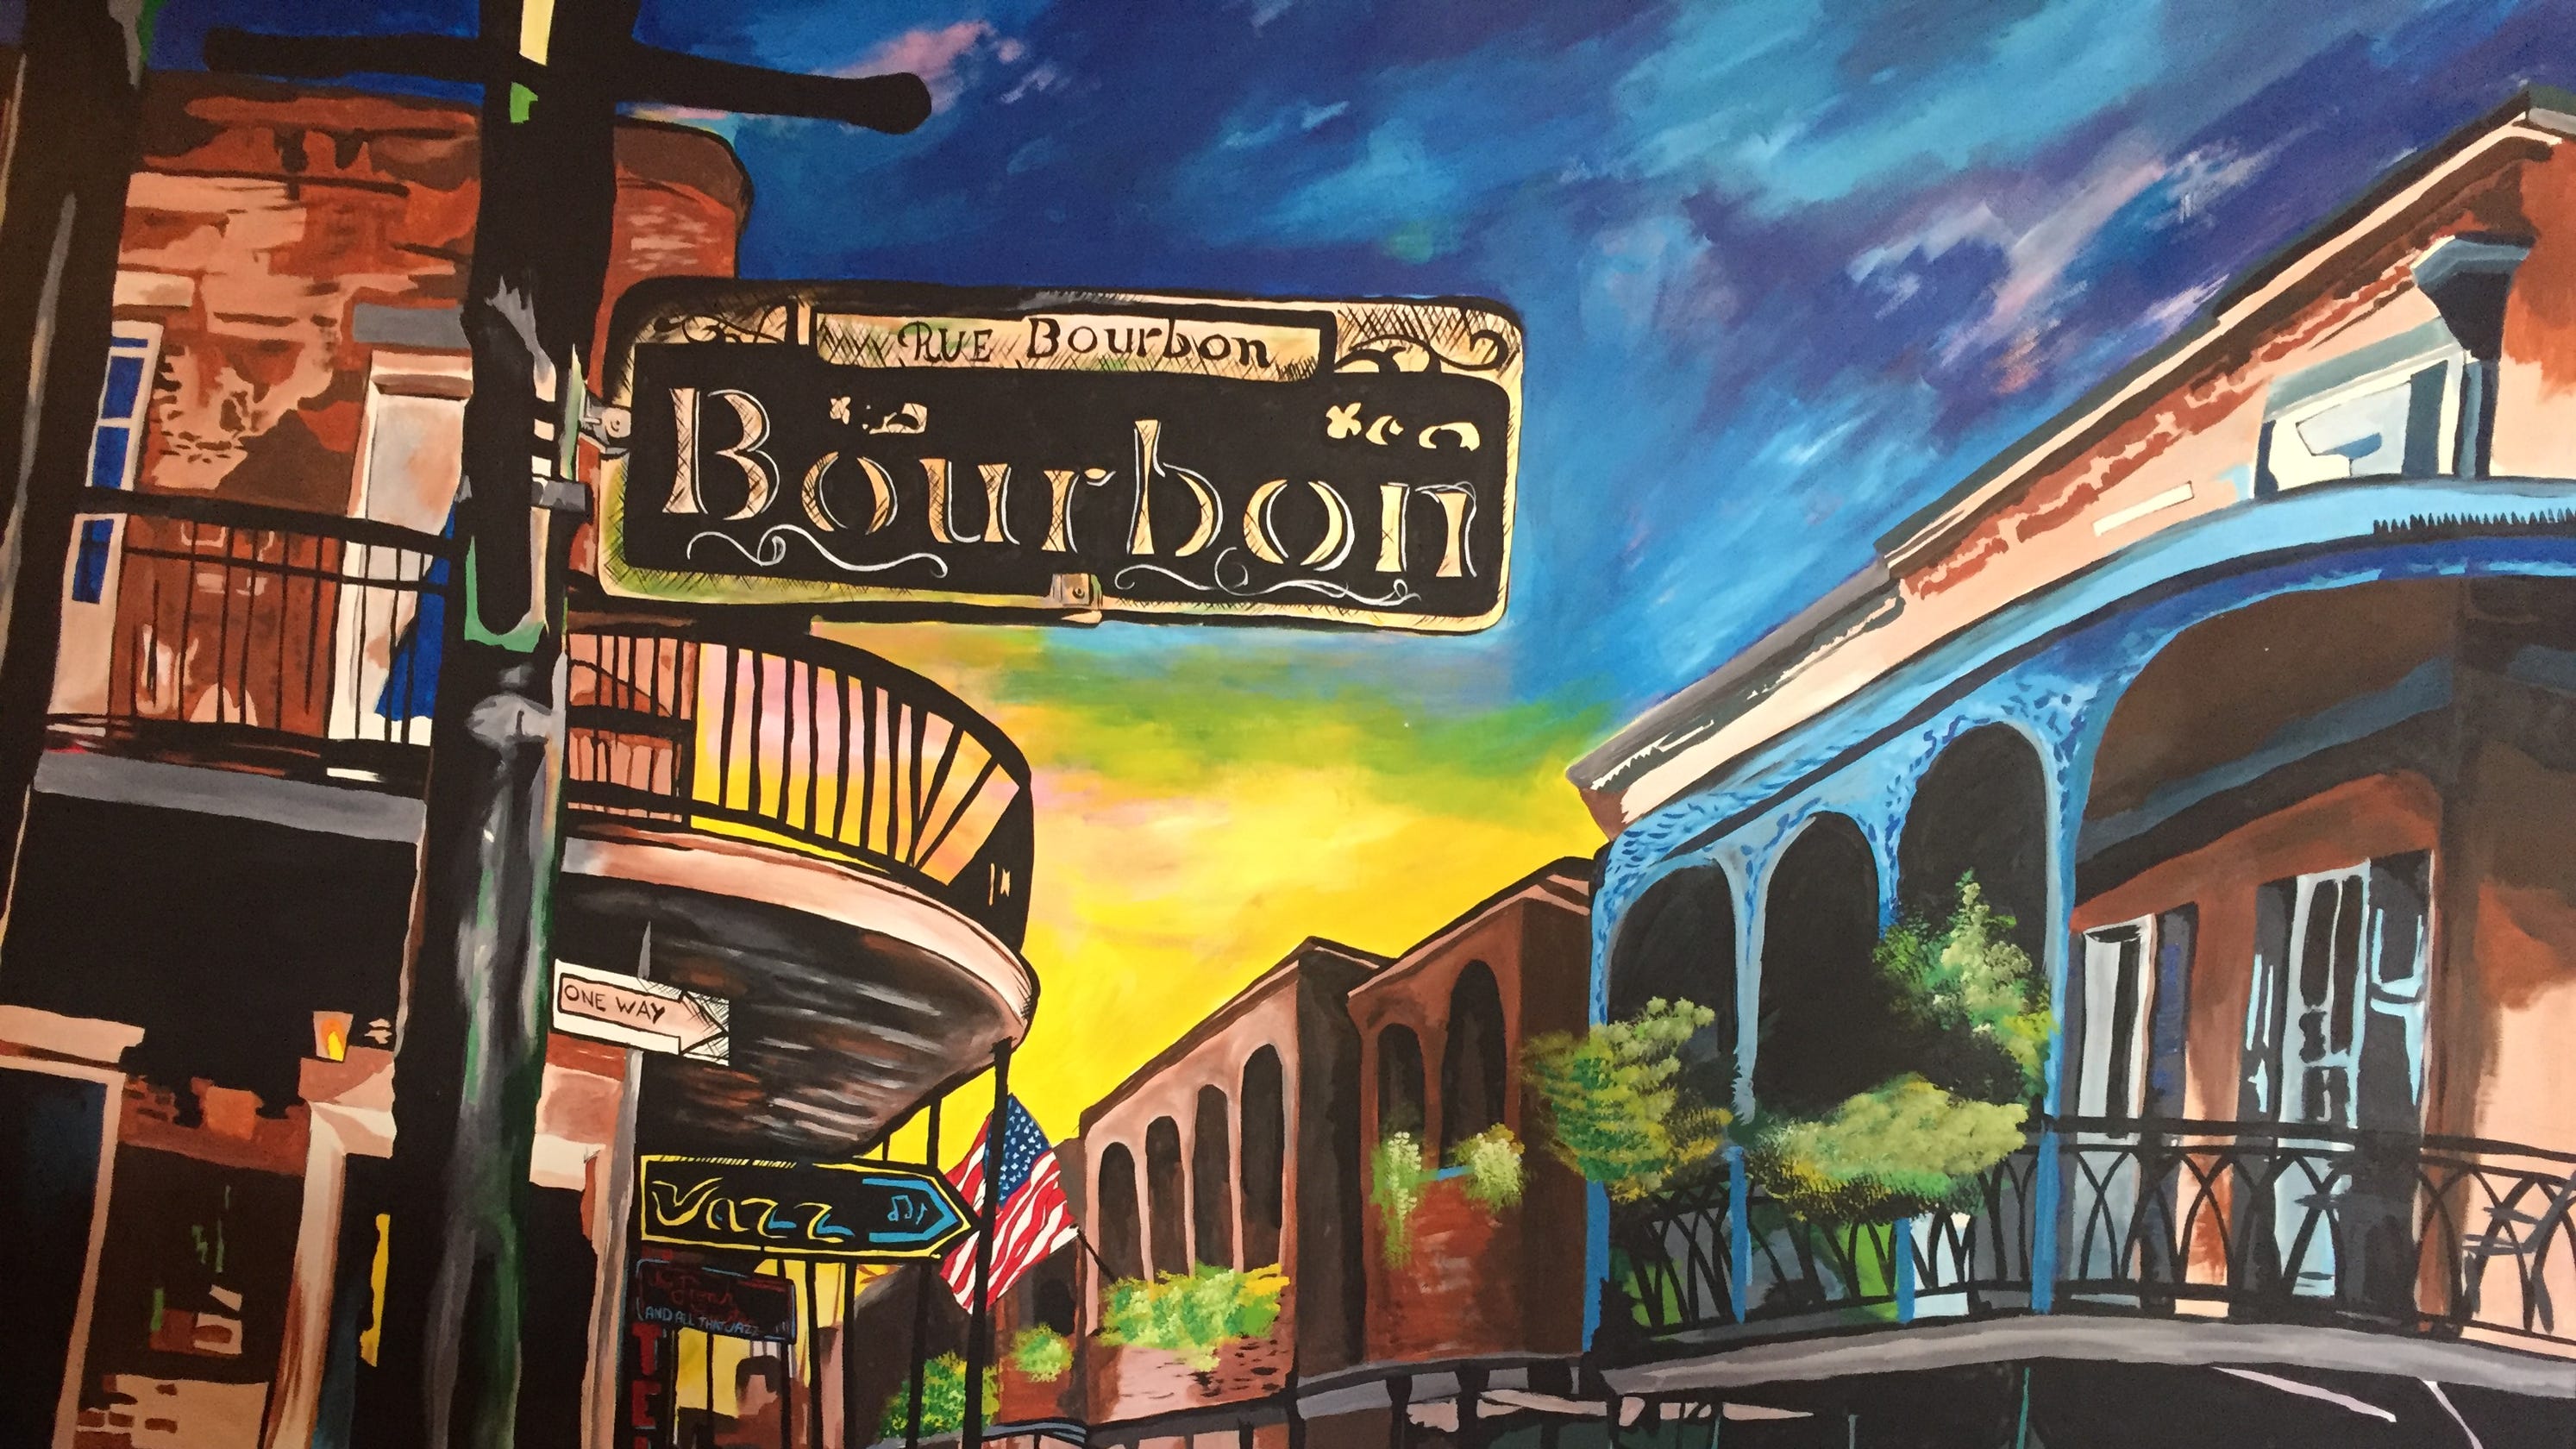 Rue Bourbon restaurant opens in Midtown Reno with New Orleans food